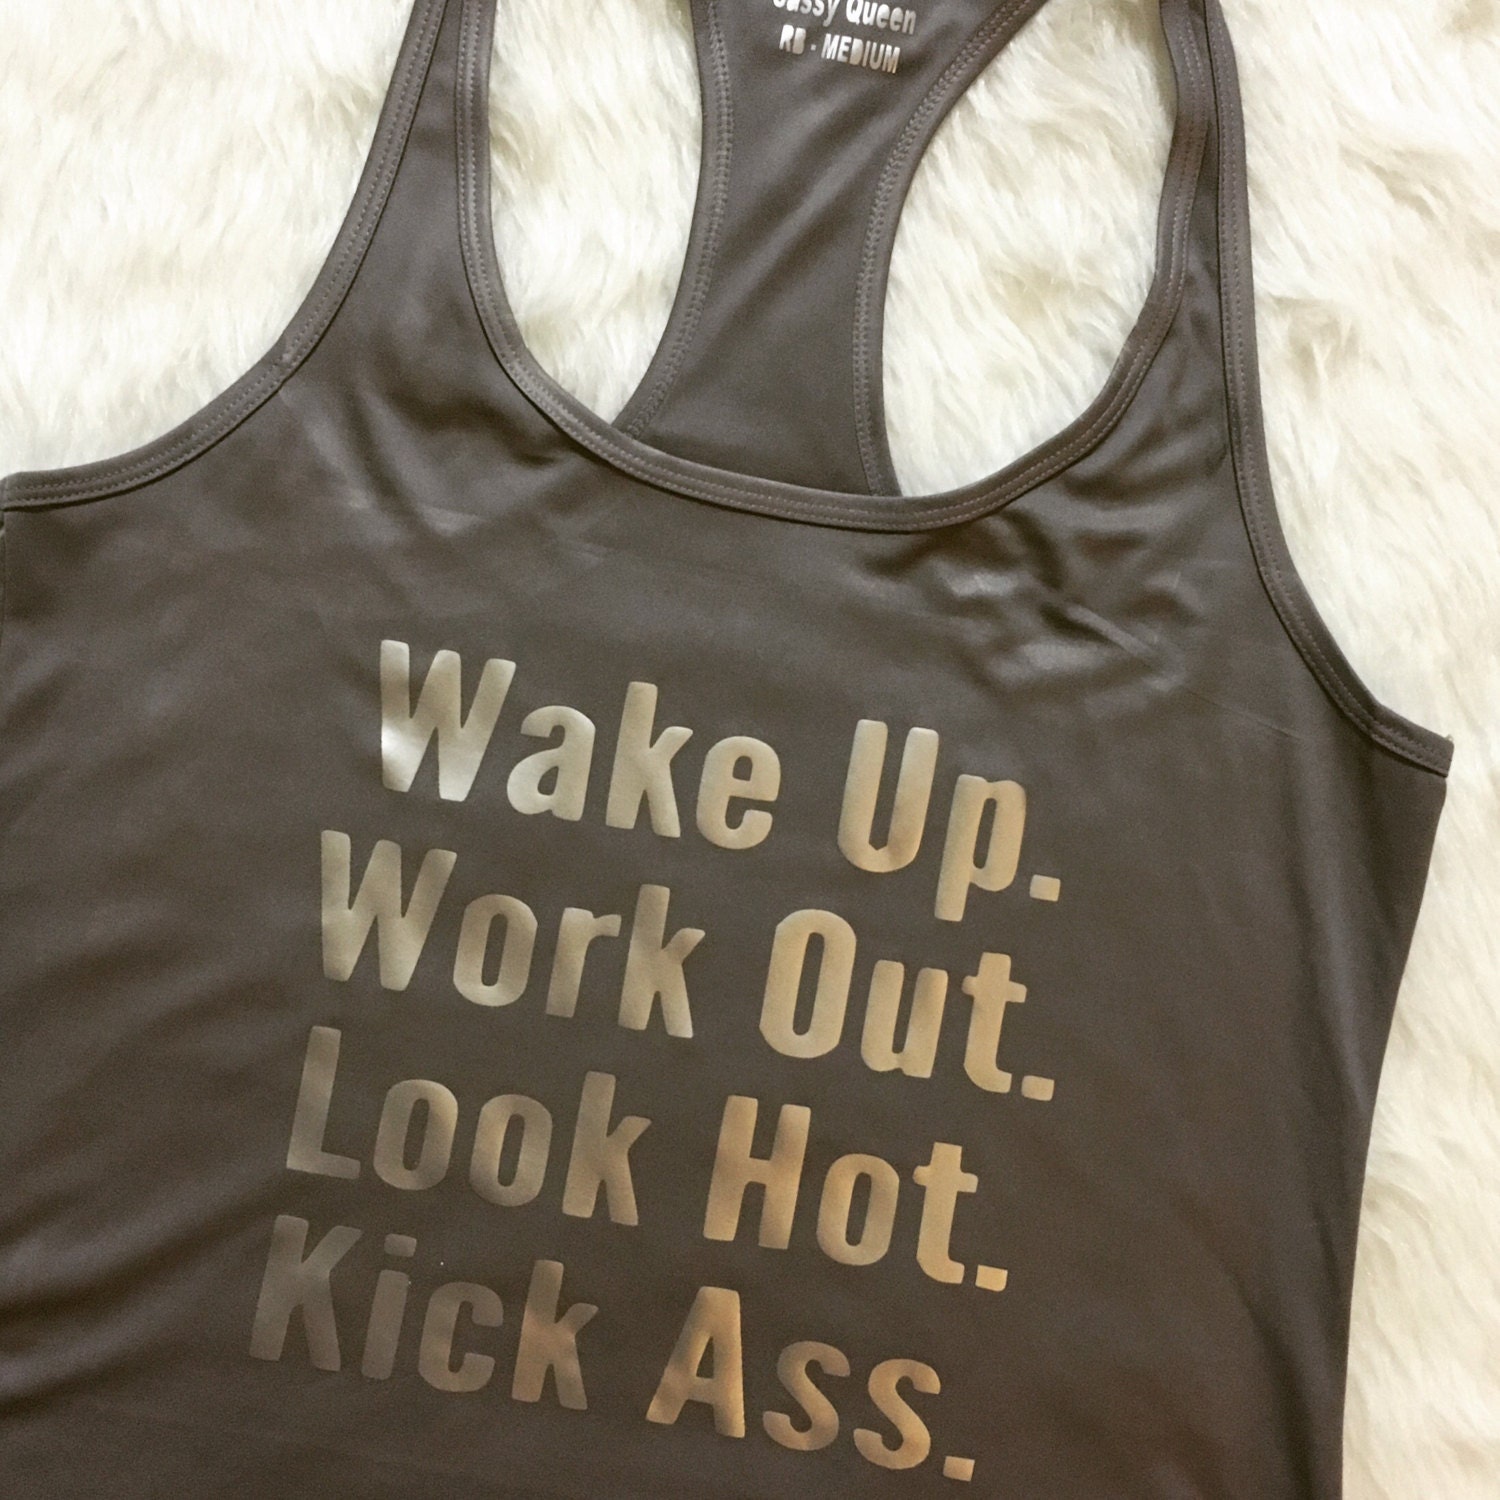 Wake Up, Work Out, Look Hot, Kick Ass / Racer-back Tank / Tank Top / Athleisure Top / Work Out Tank Top / Exercise Top/ Tshirt / Tee